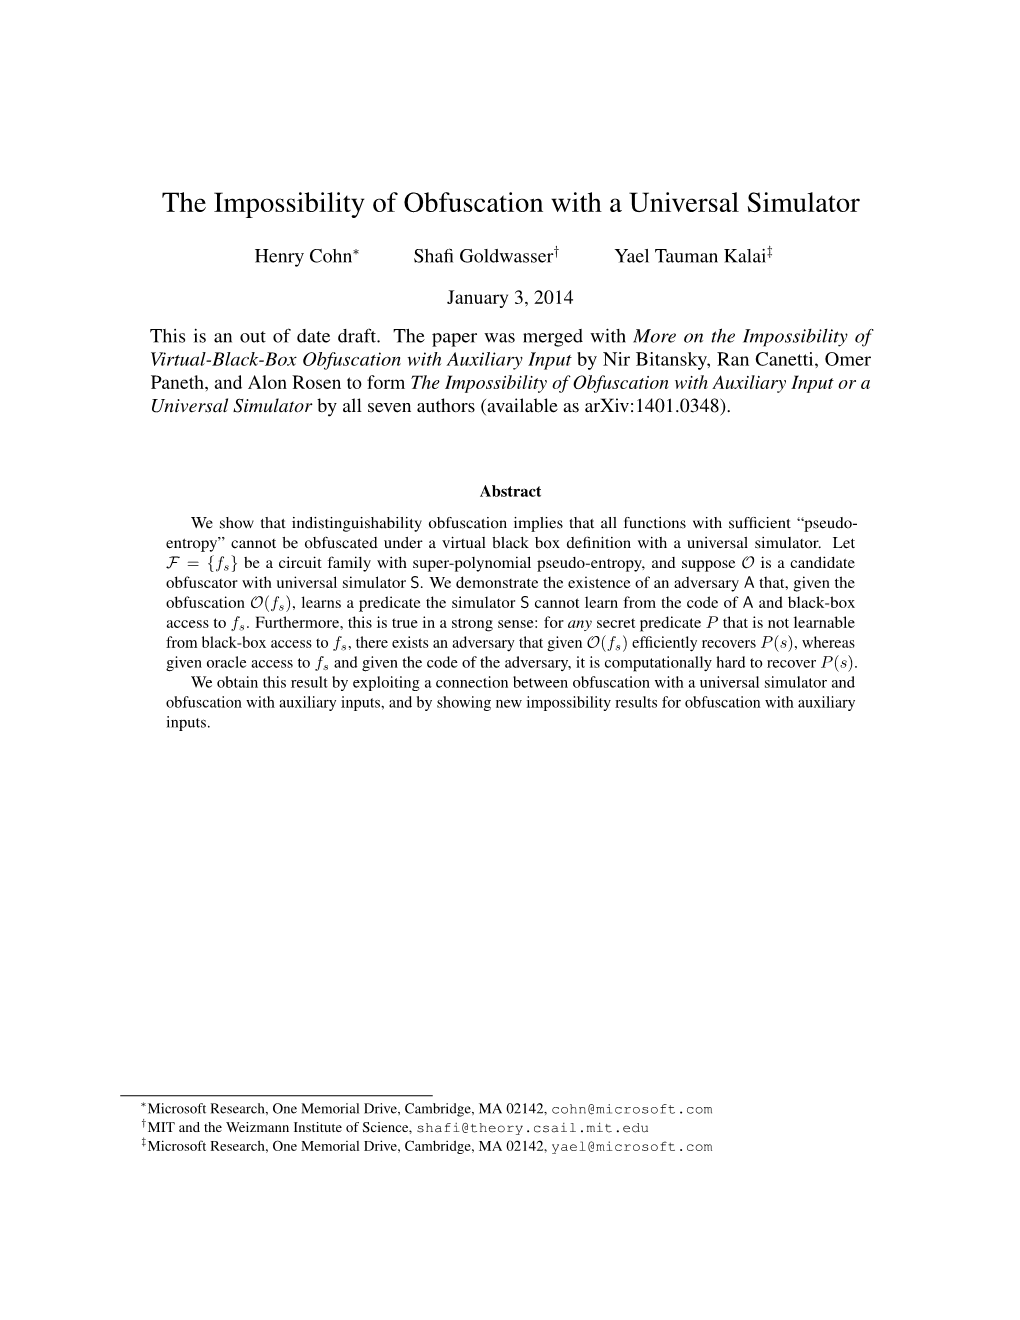 The Impossibility of Obfuscation with a Universal Simulator